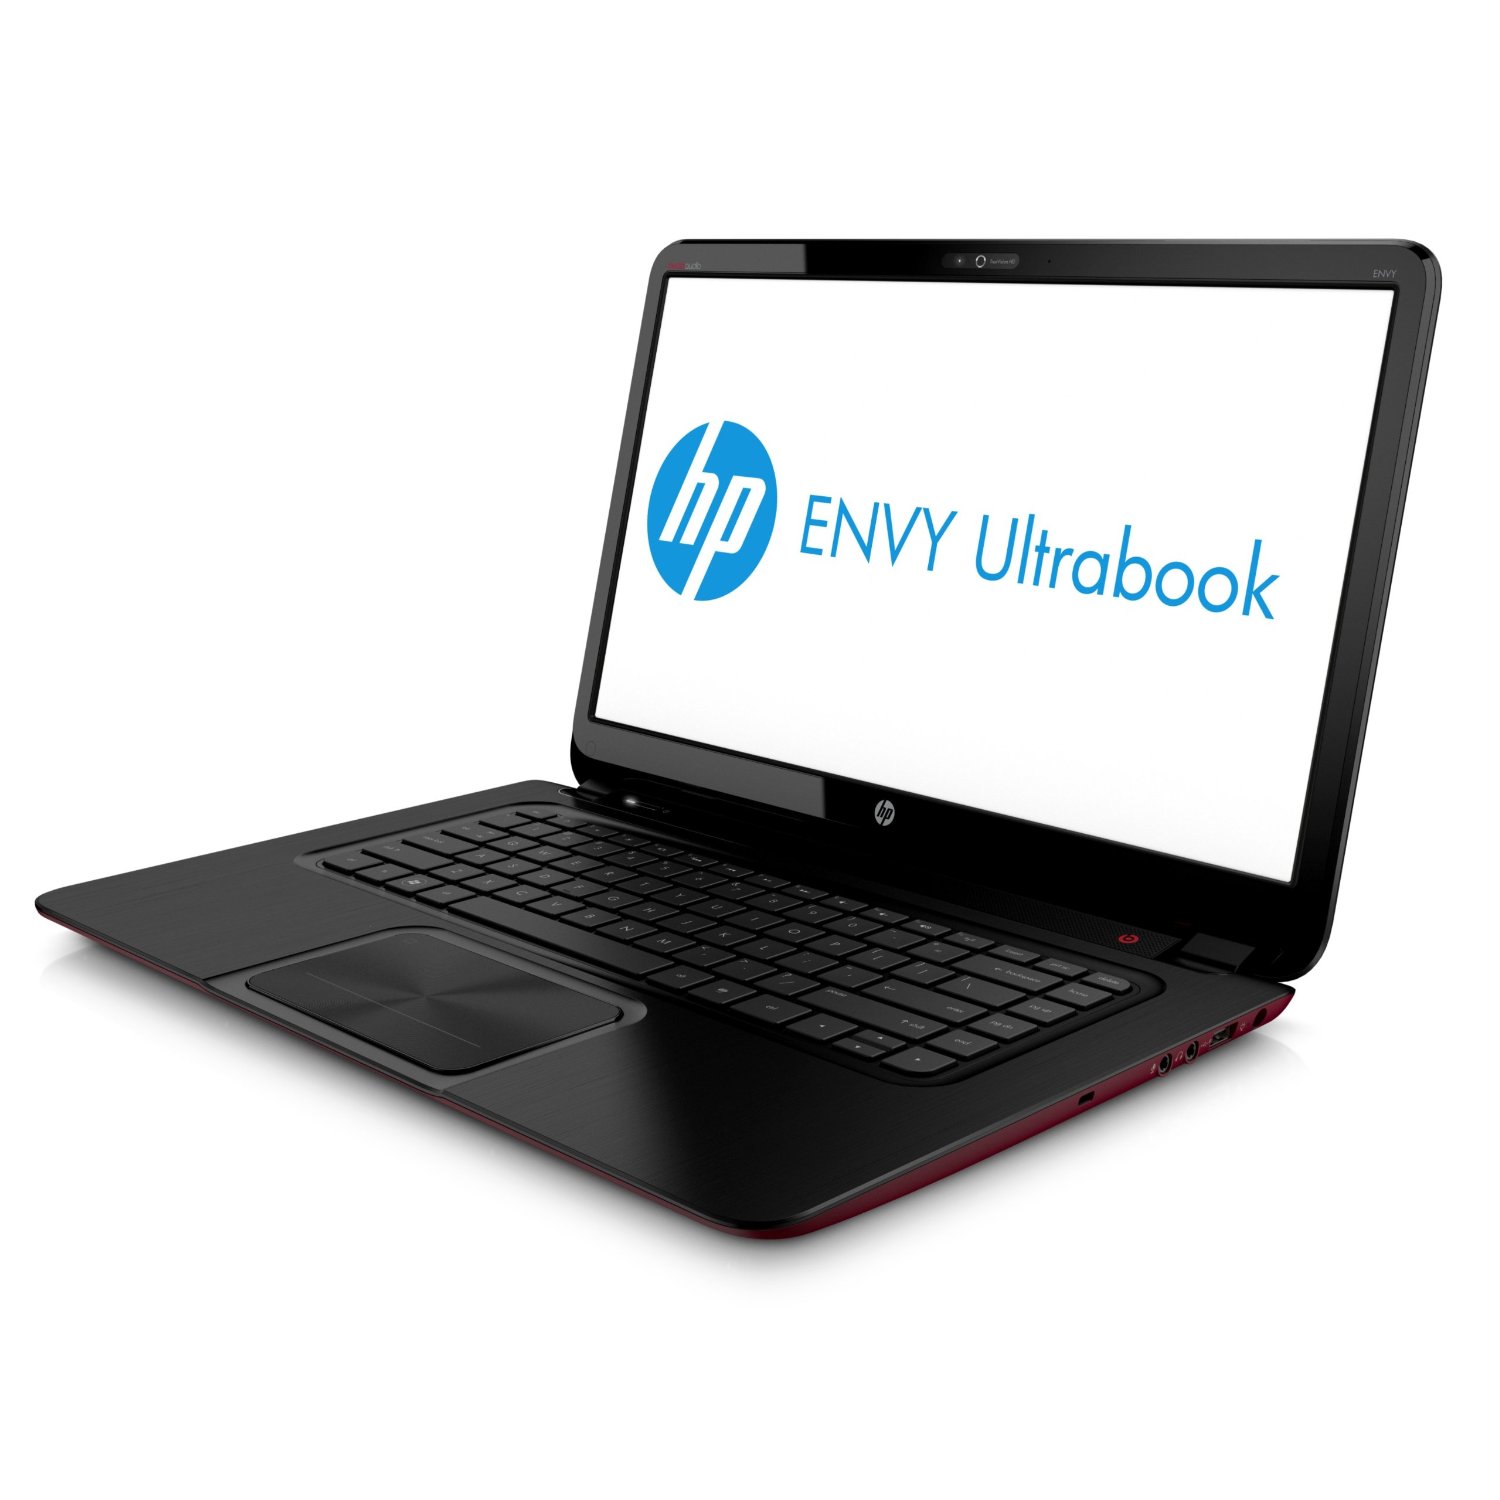 HP Envy 4-1030us Ultrabook Review Specifications in US